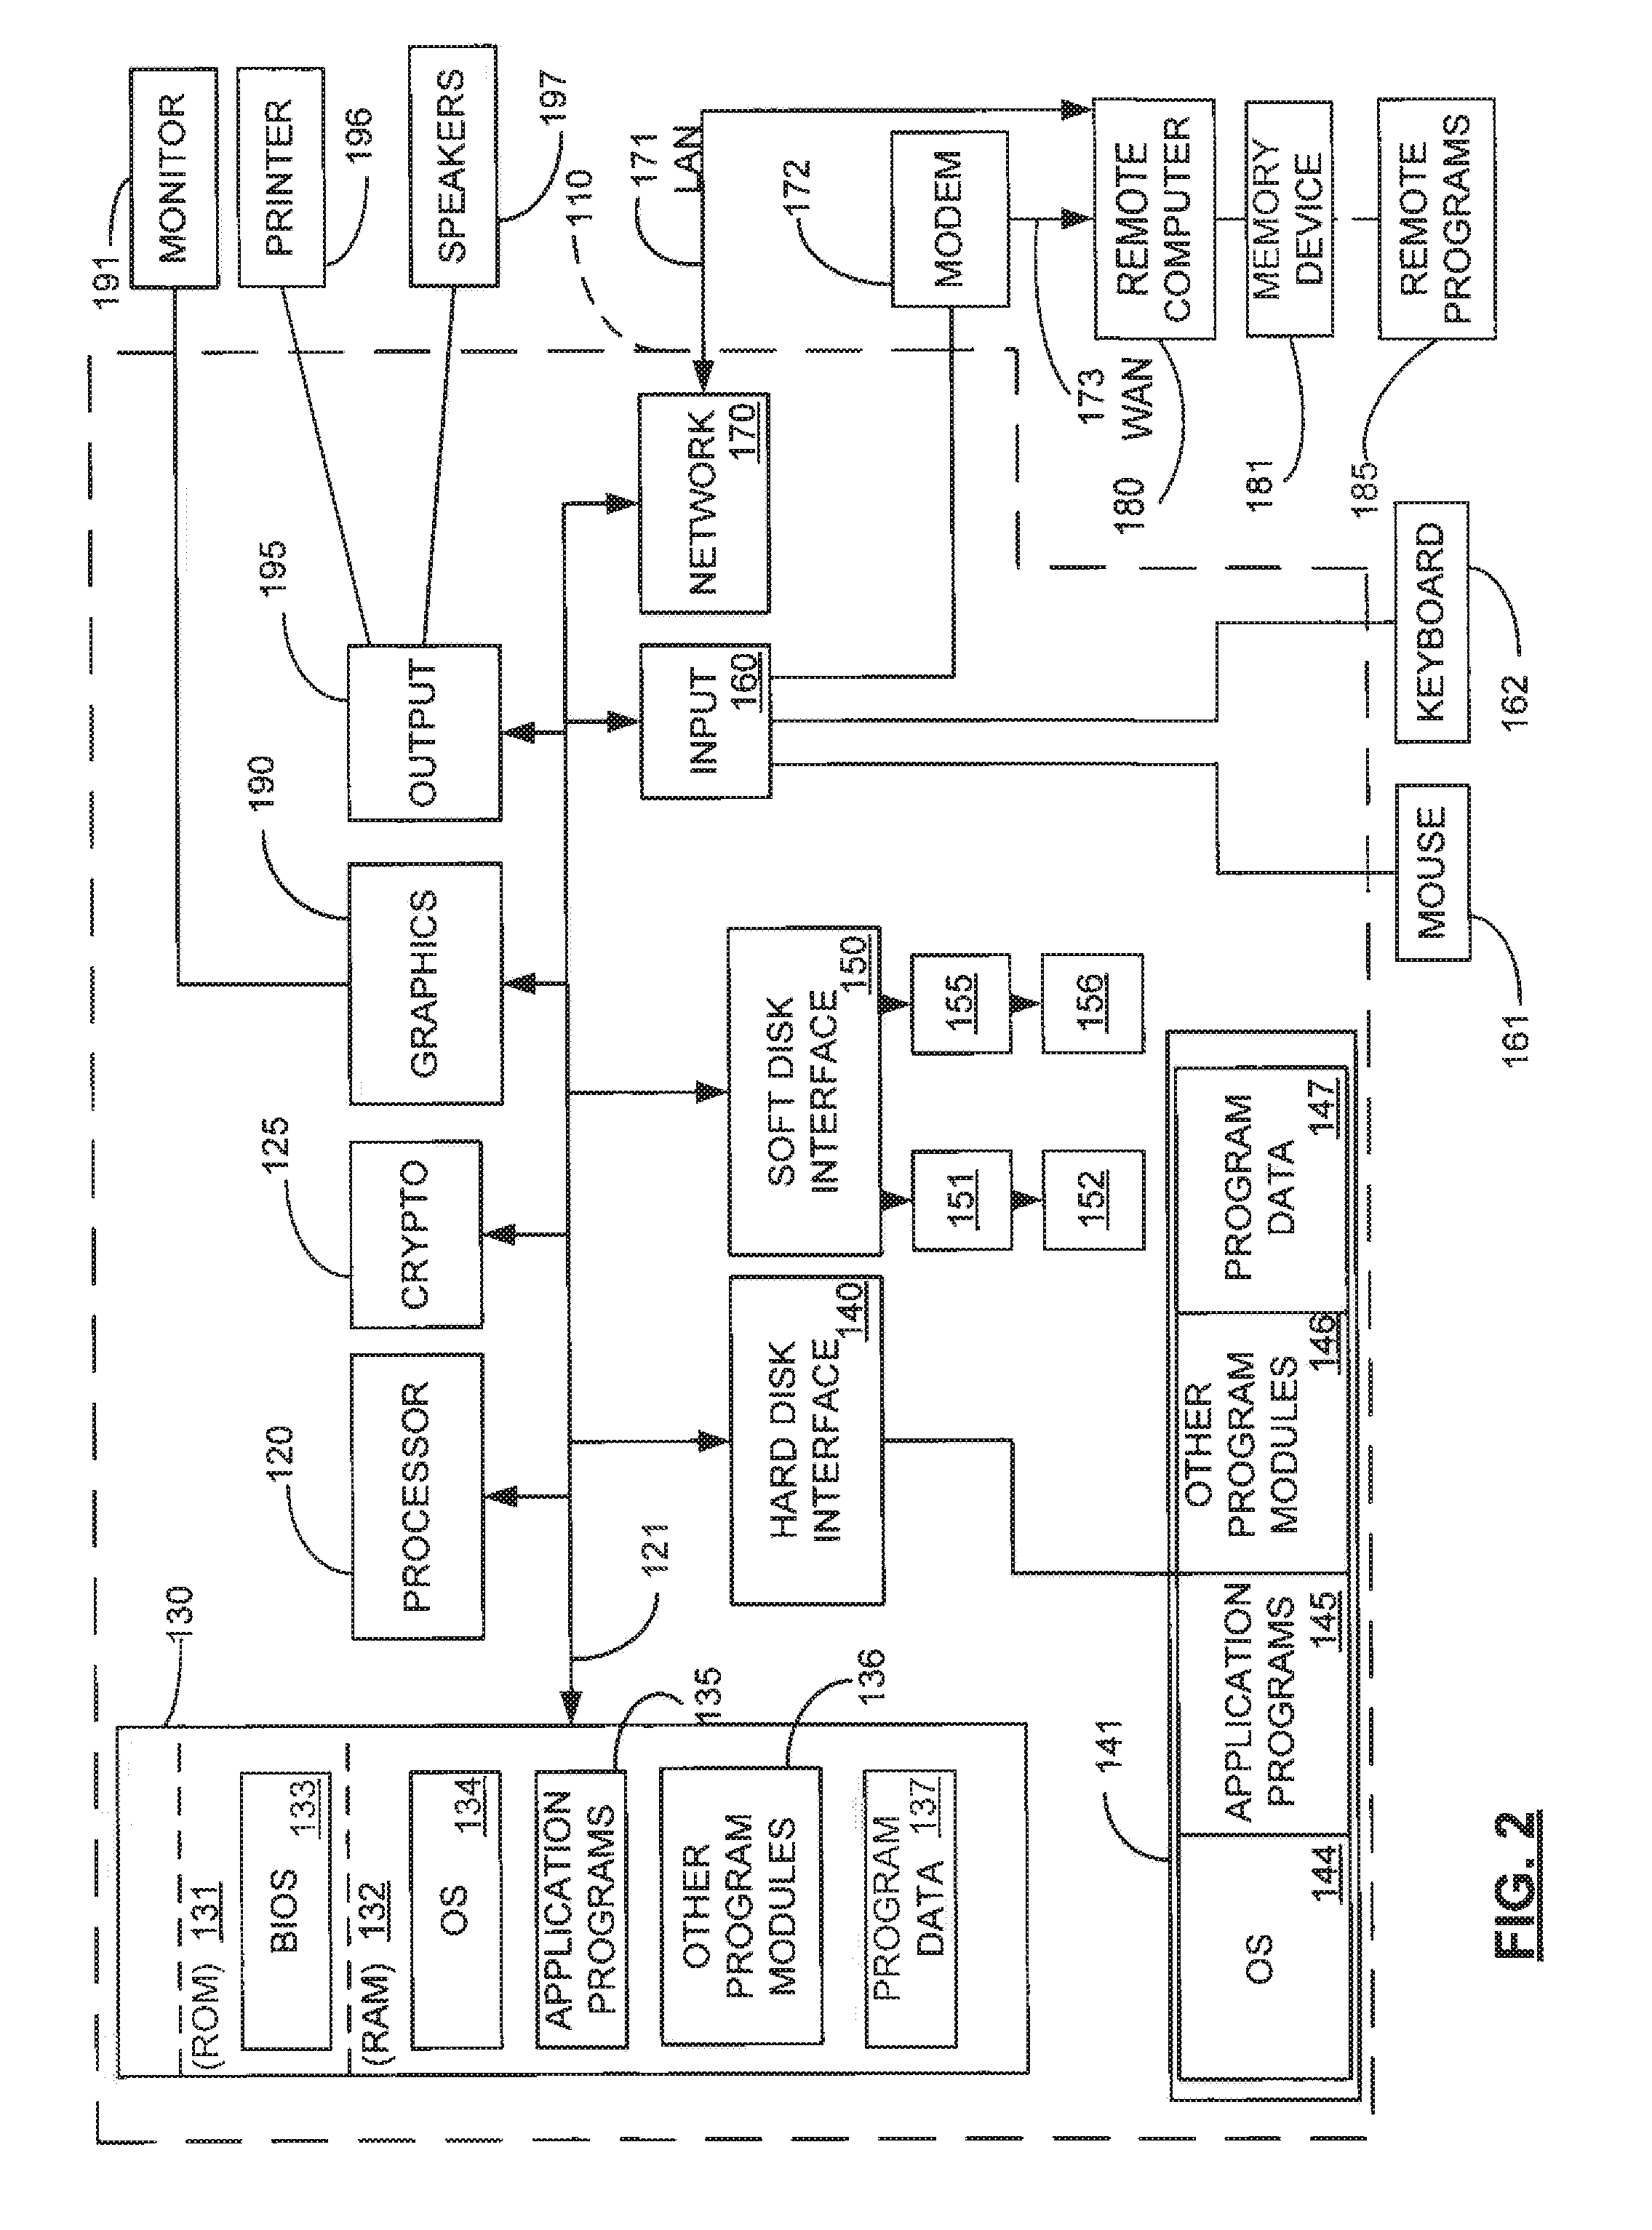 Neural network fault detection system and associated methods